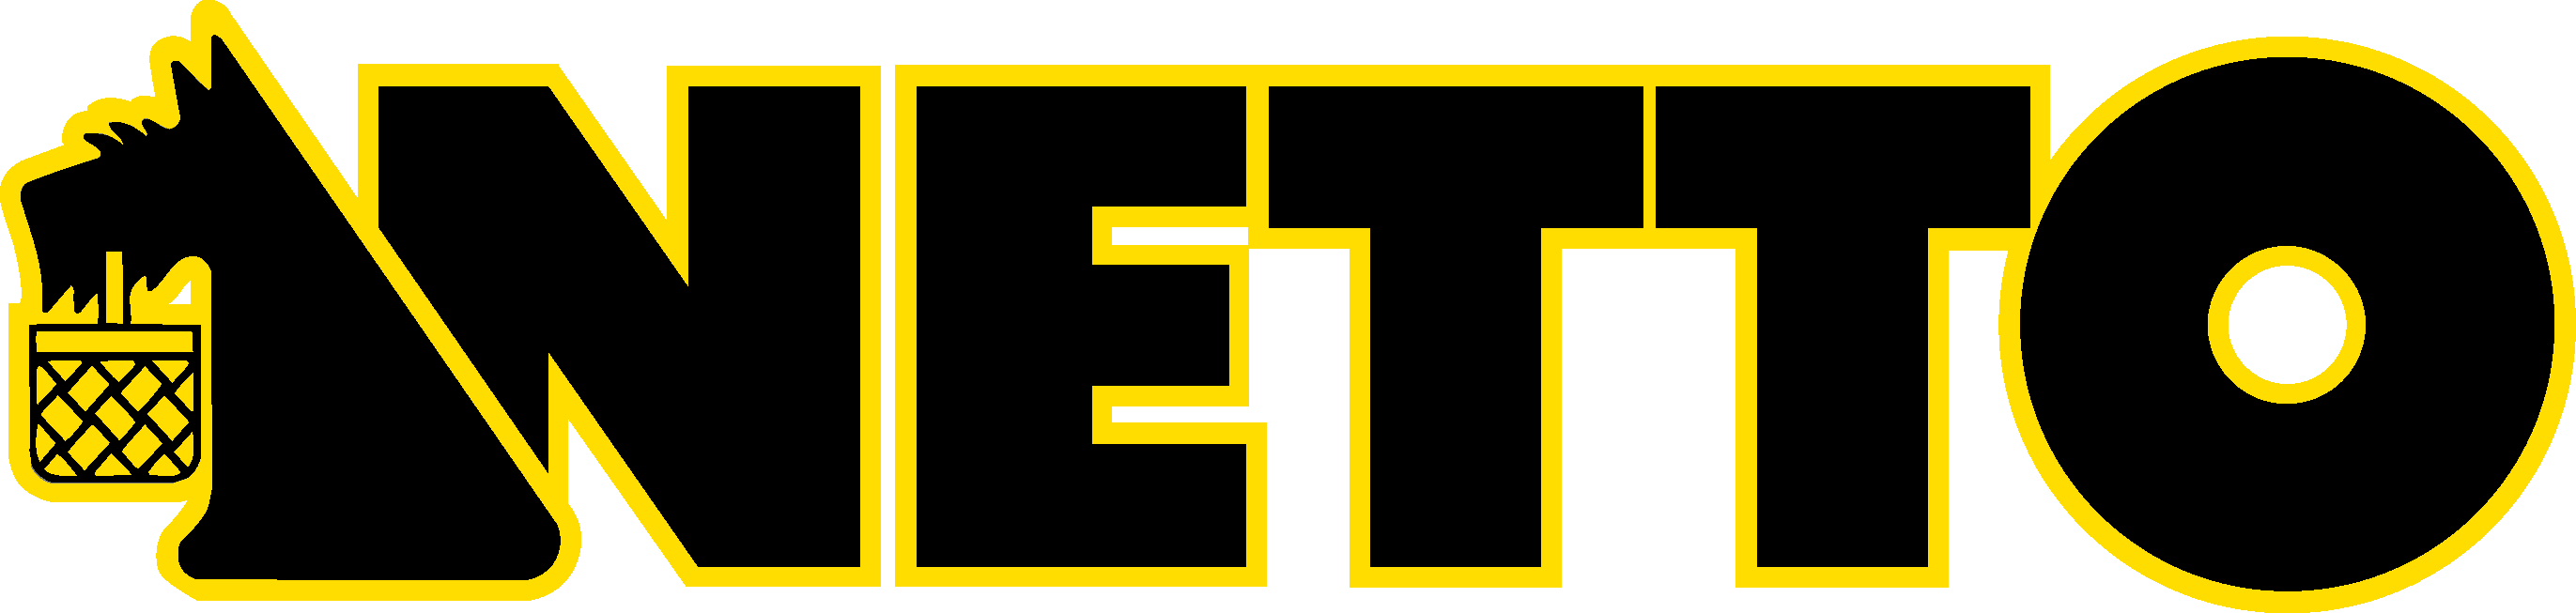 Netto Logo png